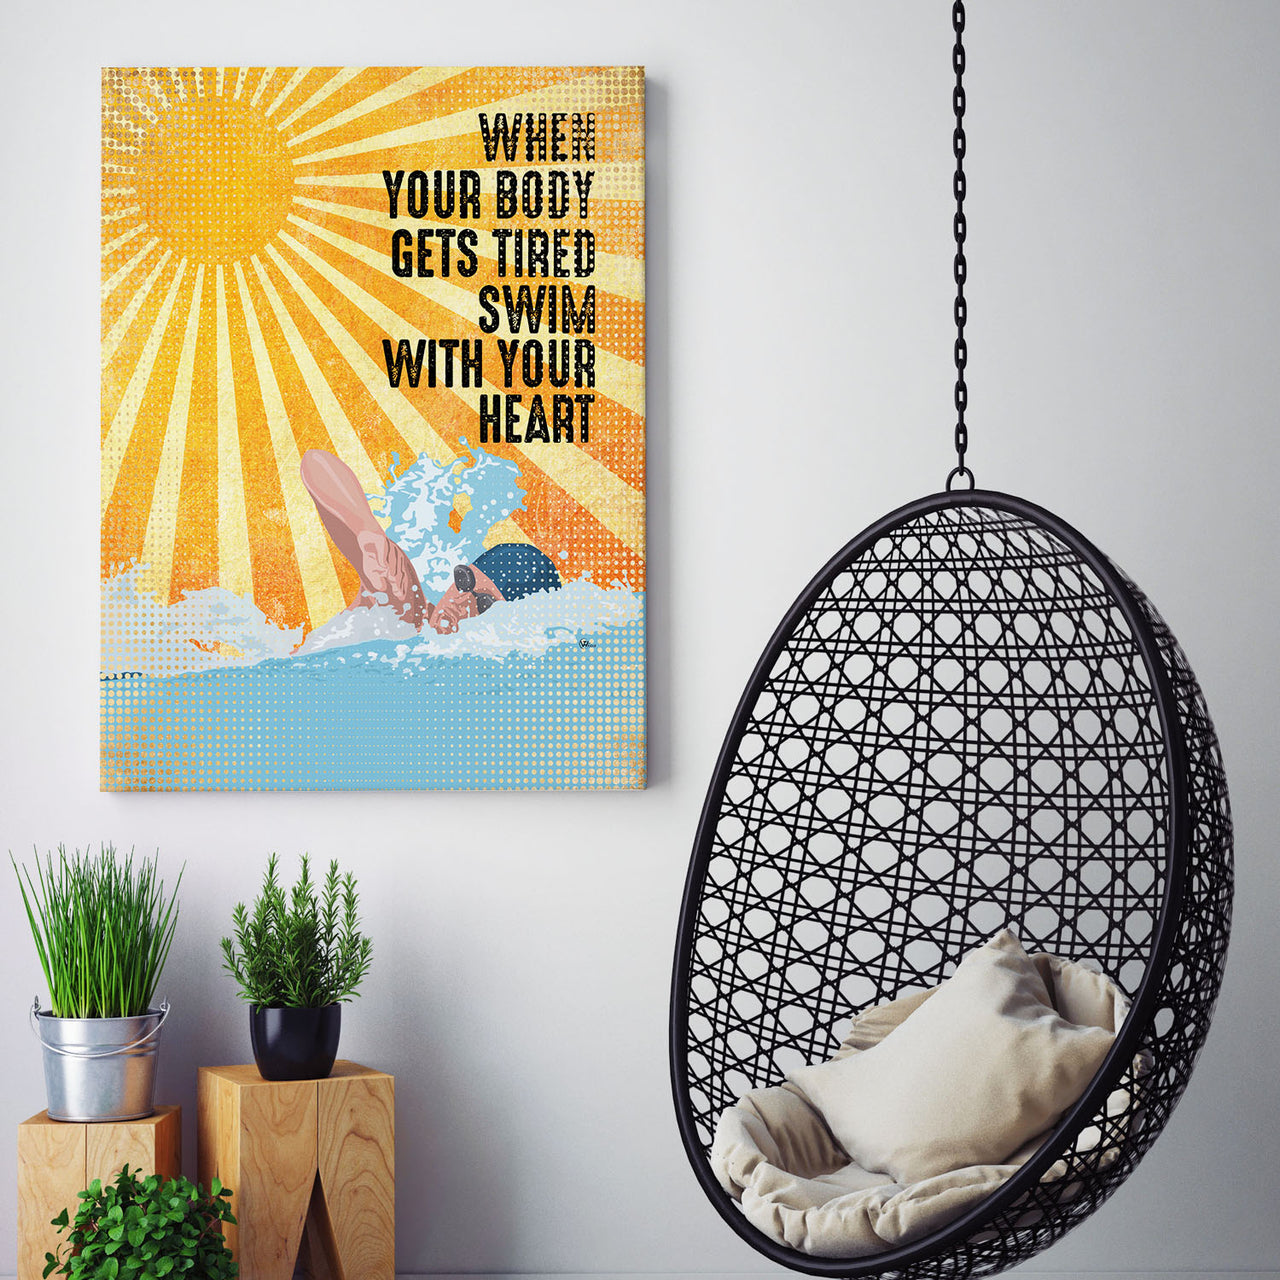 Swimmer Custom Canvas Art When Your Body Gets Tired Swim With Your Heart Canvas Art for Boy Girl Men Women